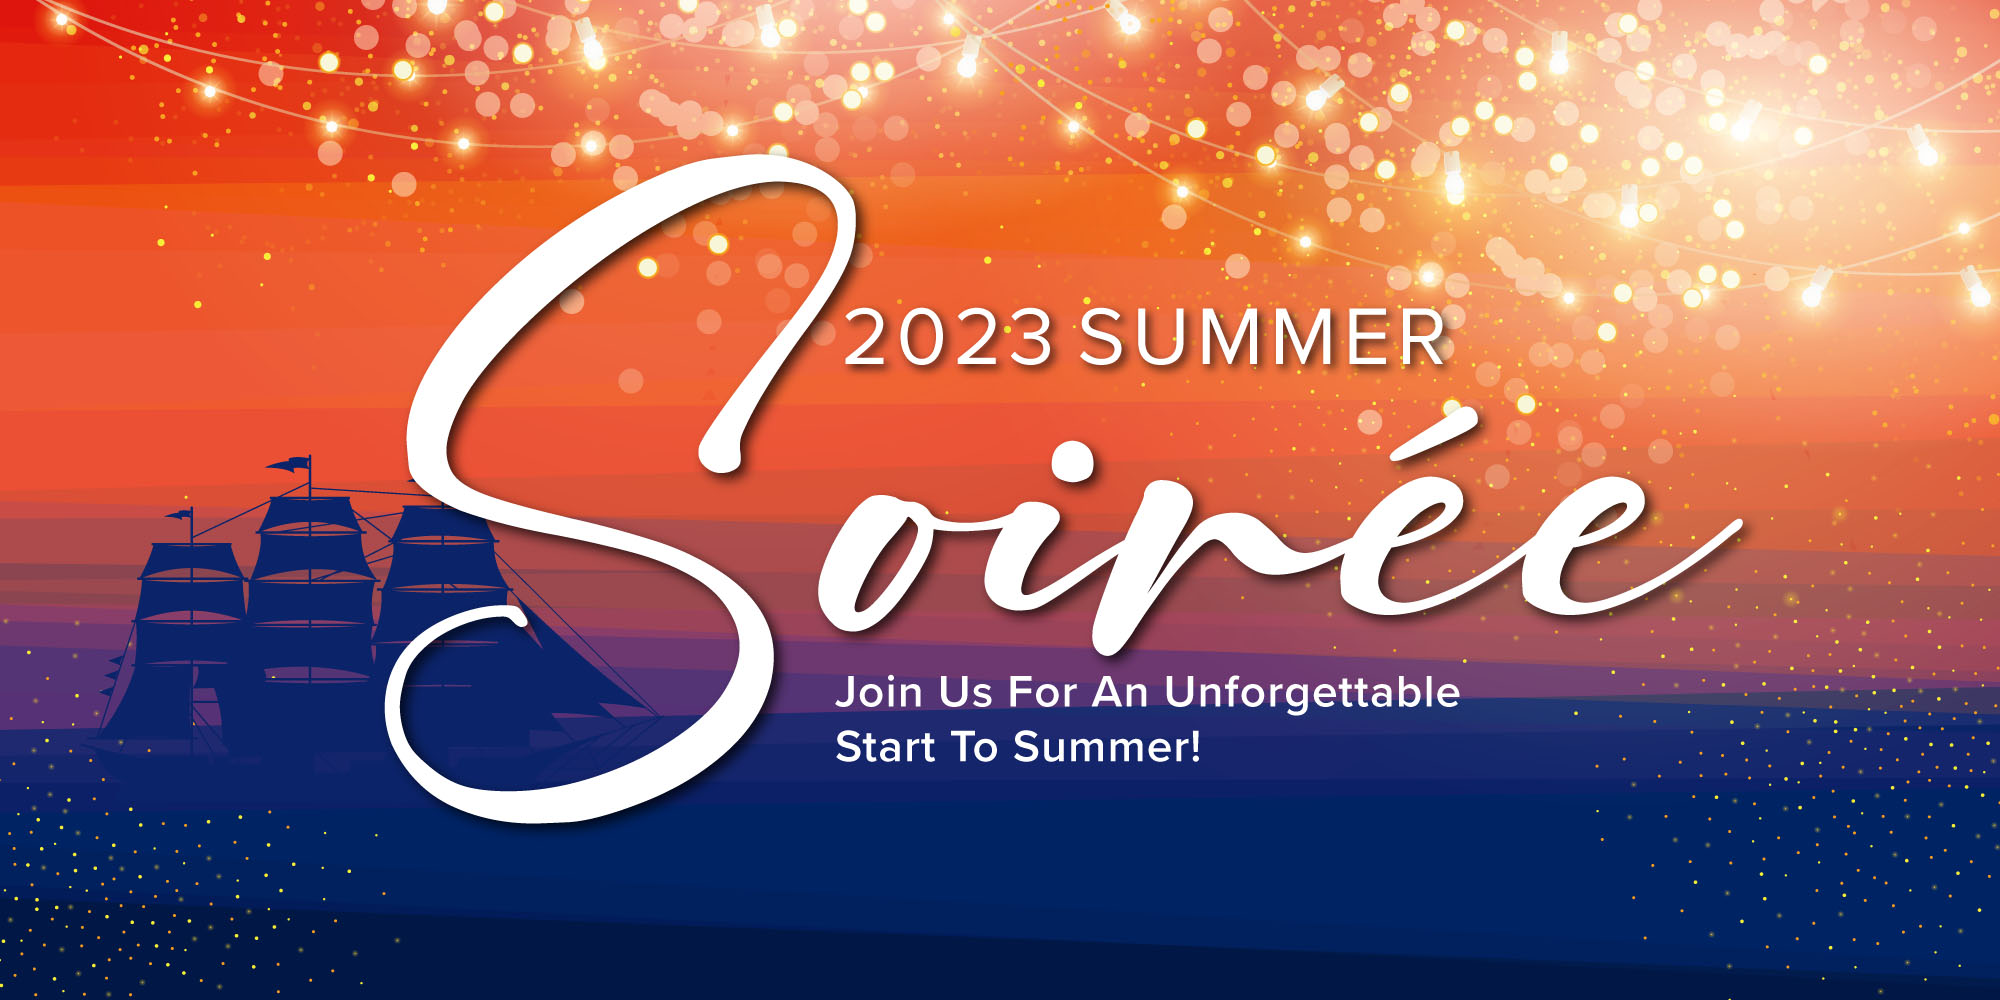 Summer Soiree promo graphic - ship at sunset